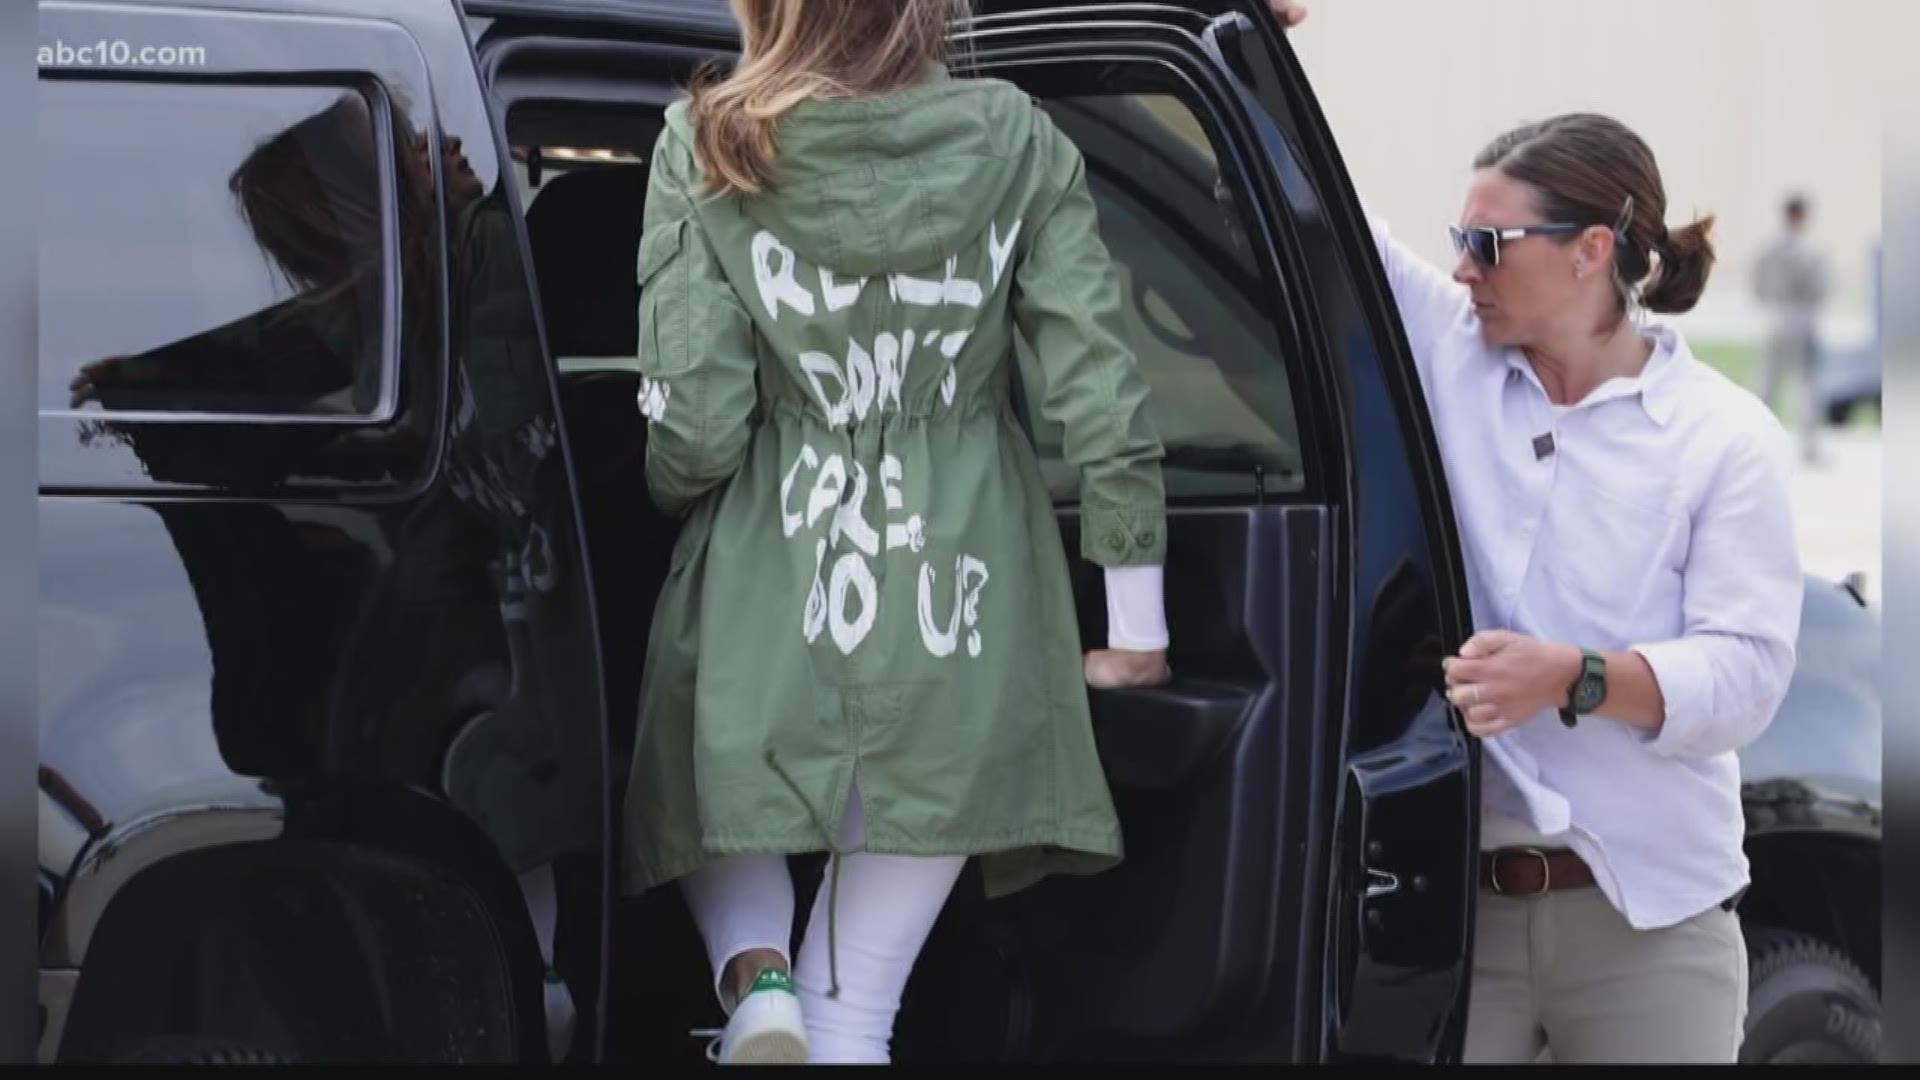 First Lady Melania Trump is catching some flack for wearing a jacket with the words "I don't really care" as she headed to visit children's detention centers.